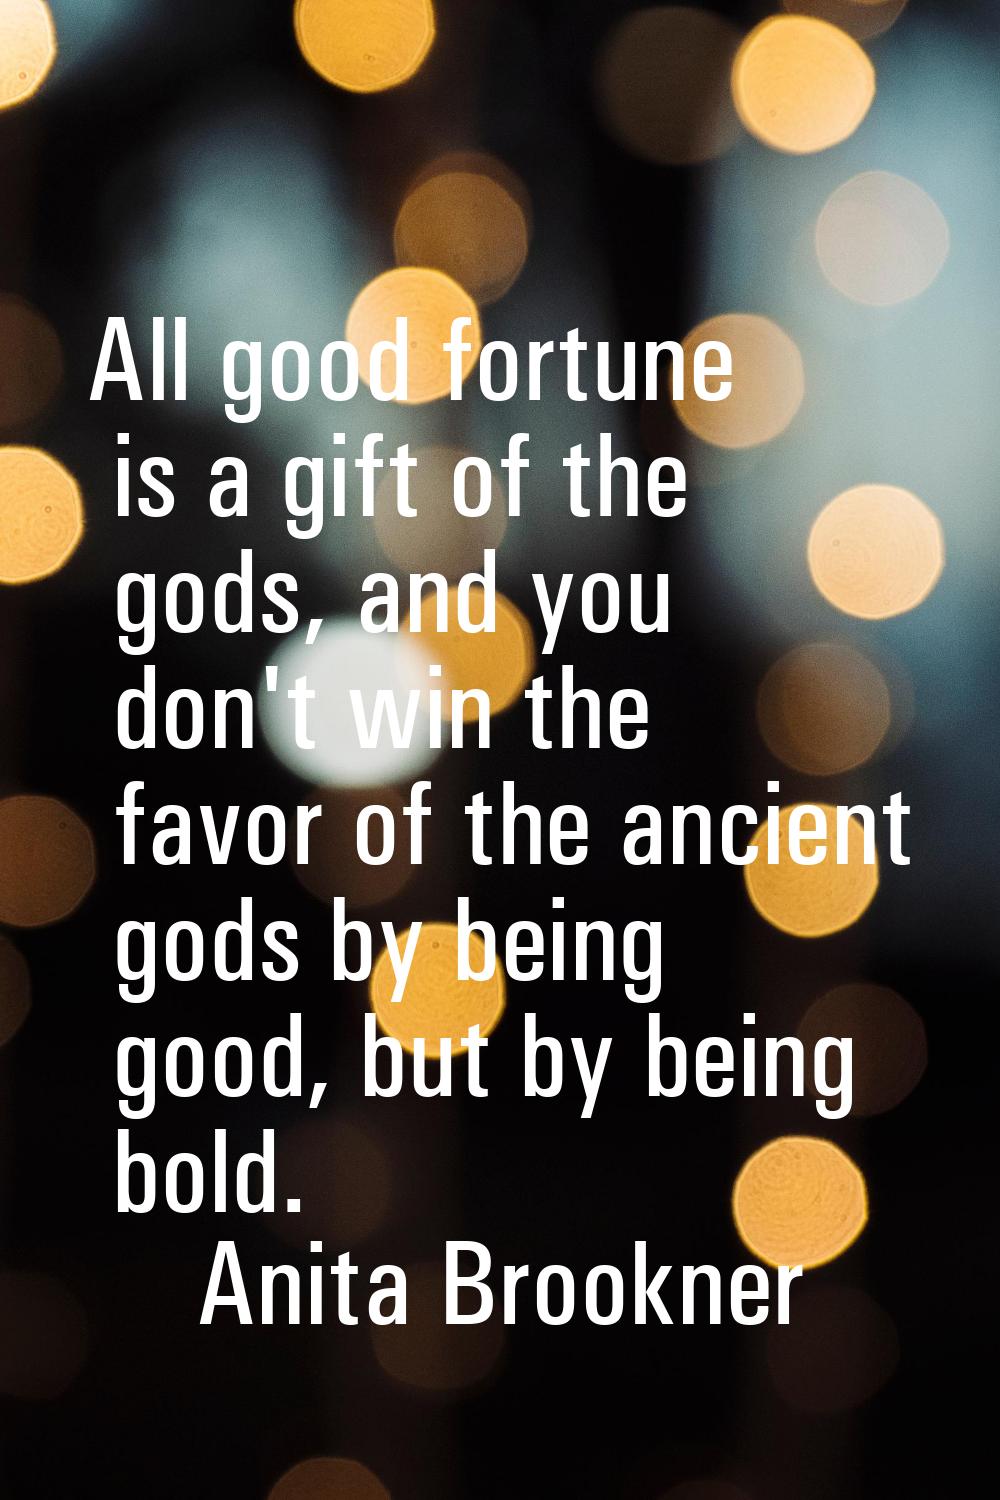 All good fortune is a gift of the gods, and you don't win the favor of the ancient gods by being go